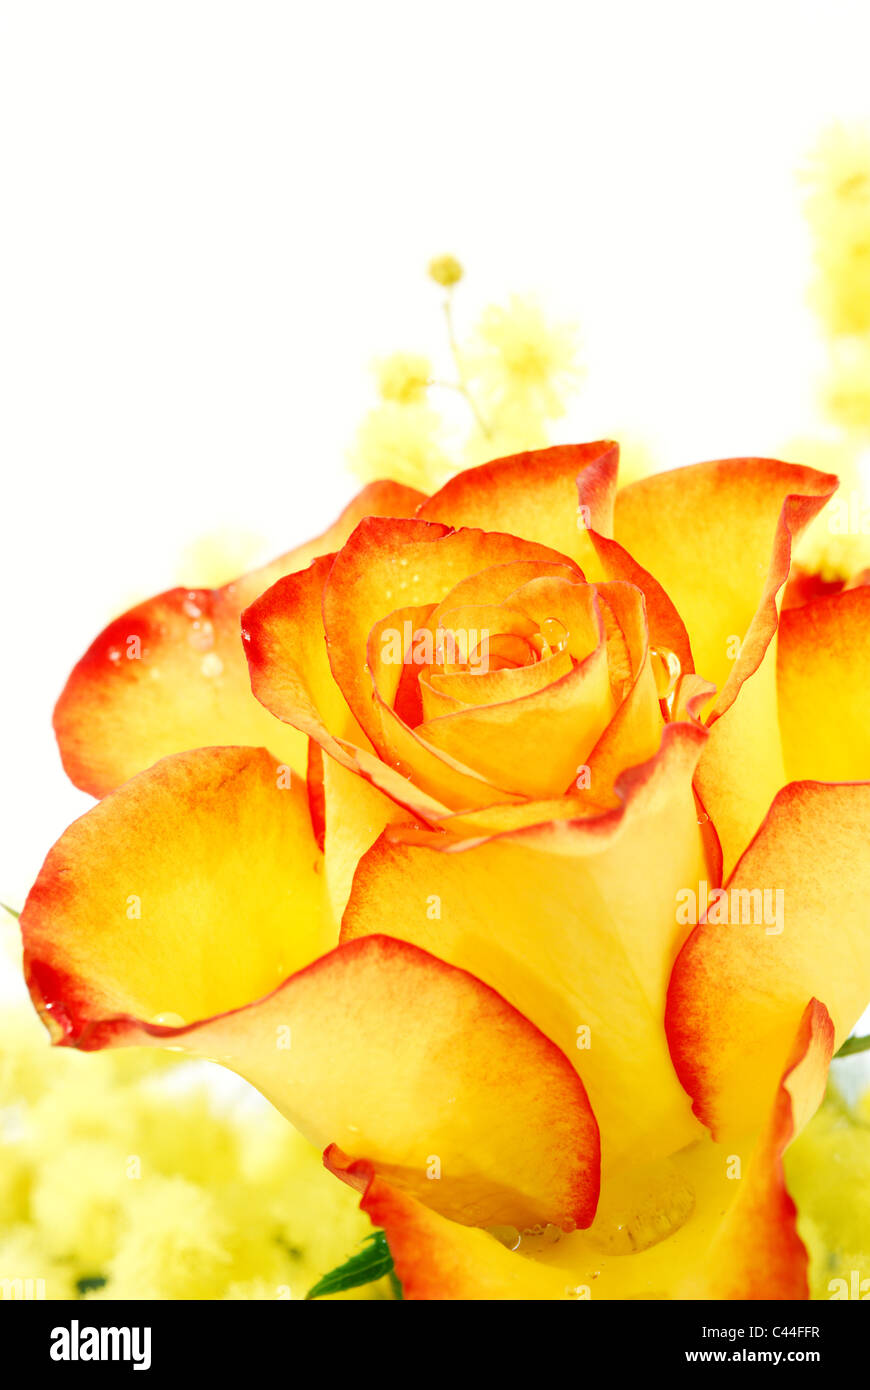 Red and yellow rose closeup photographed on white background Stock Photo